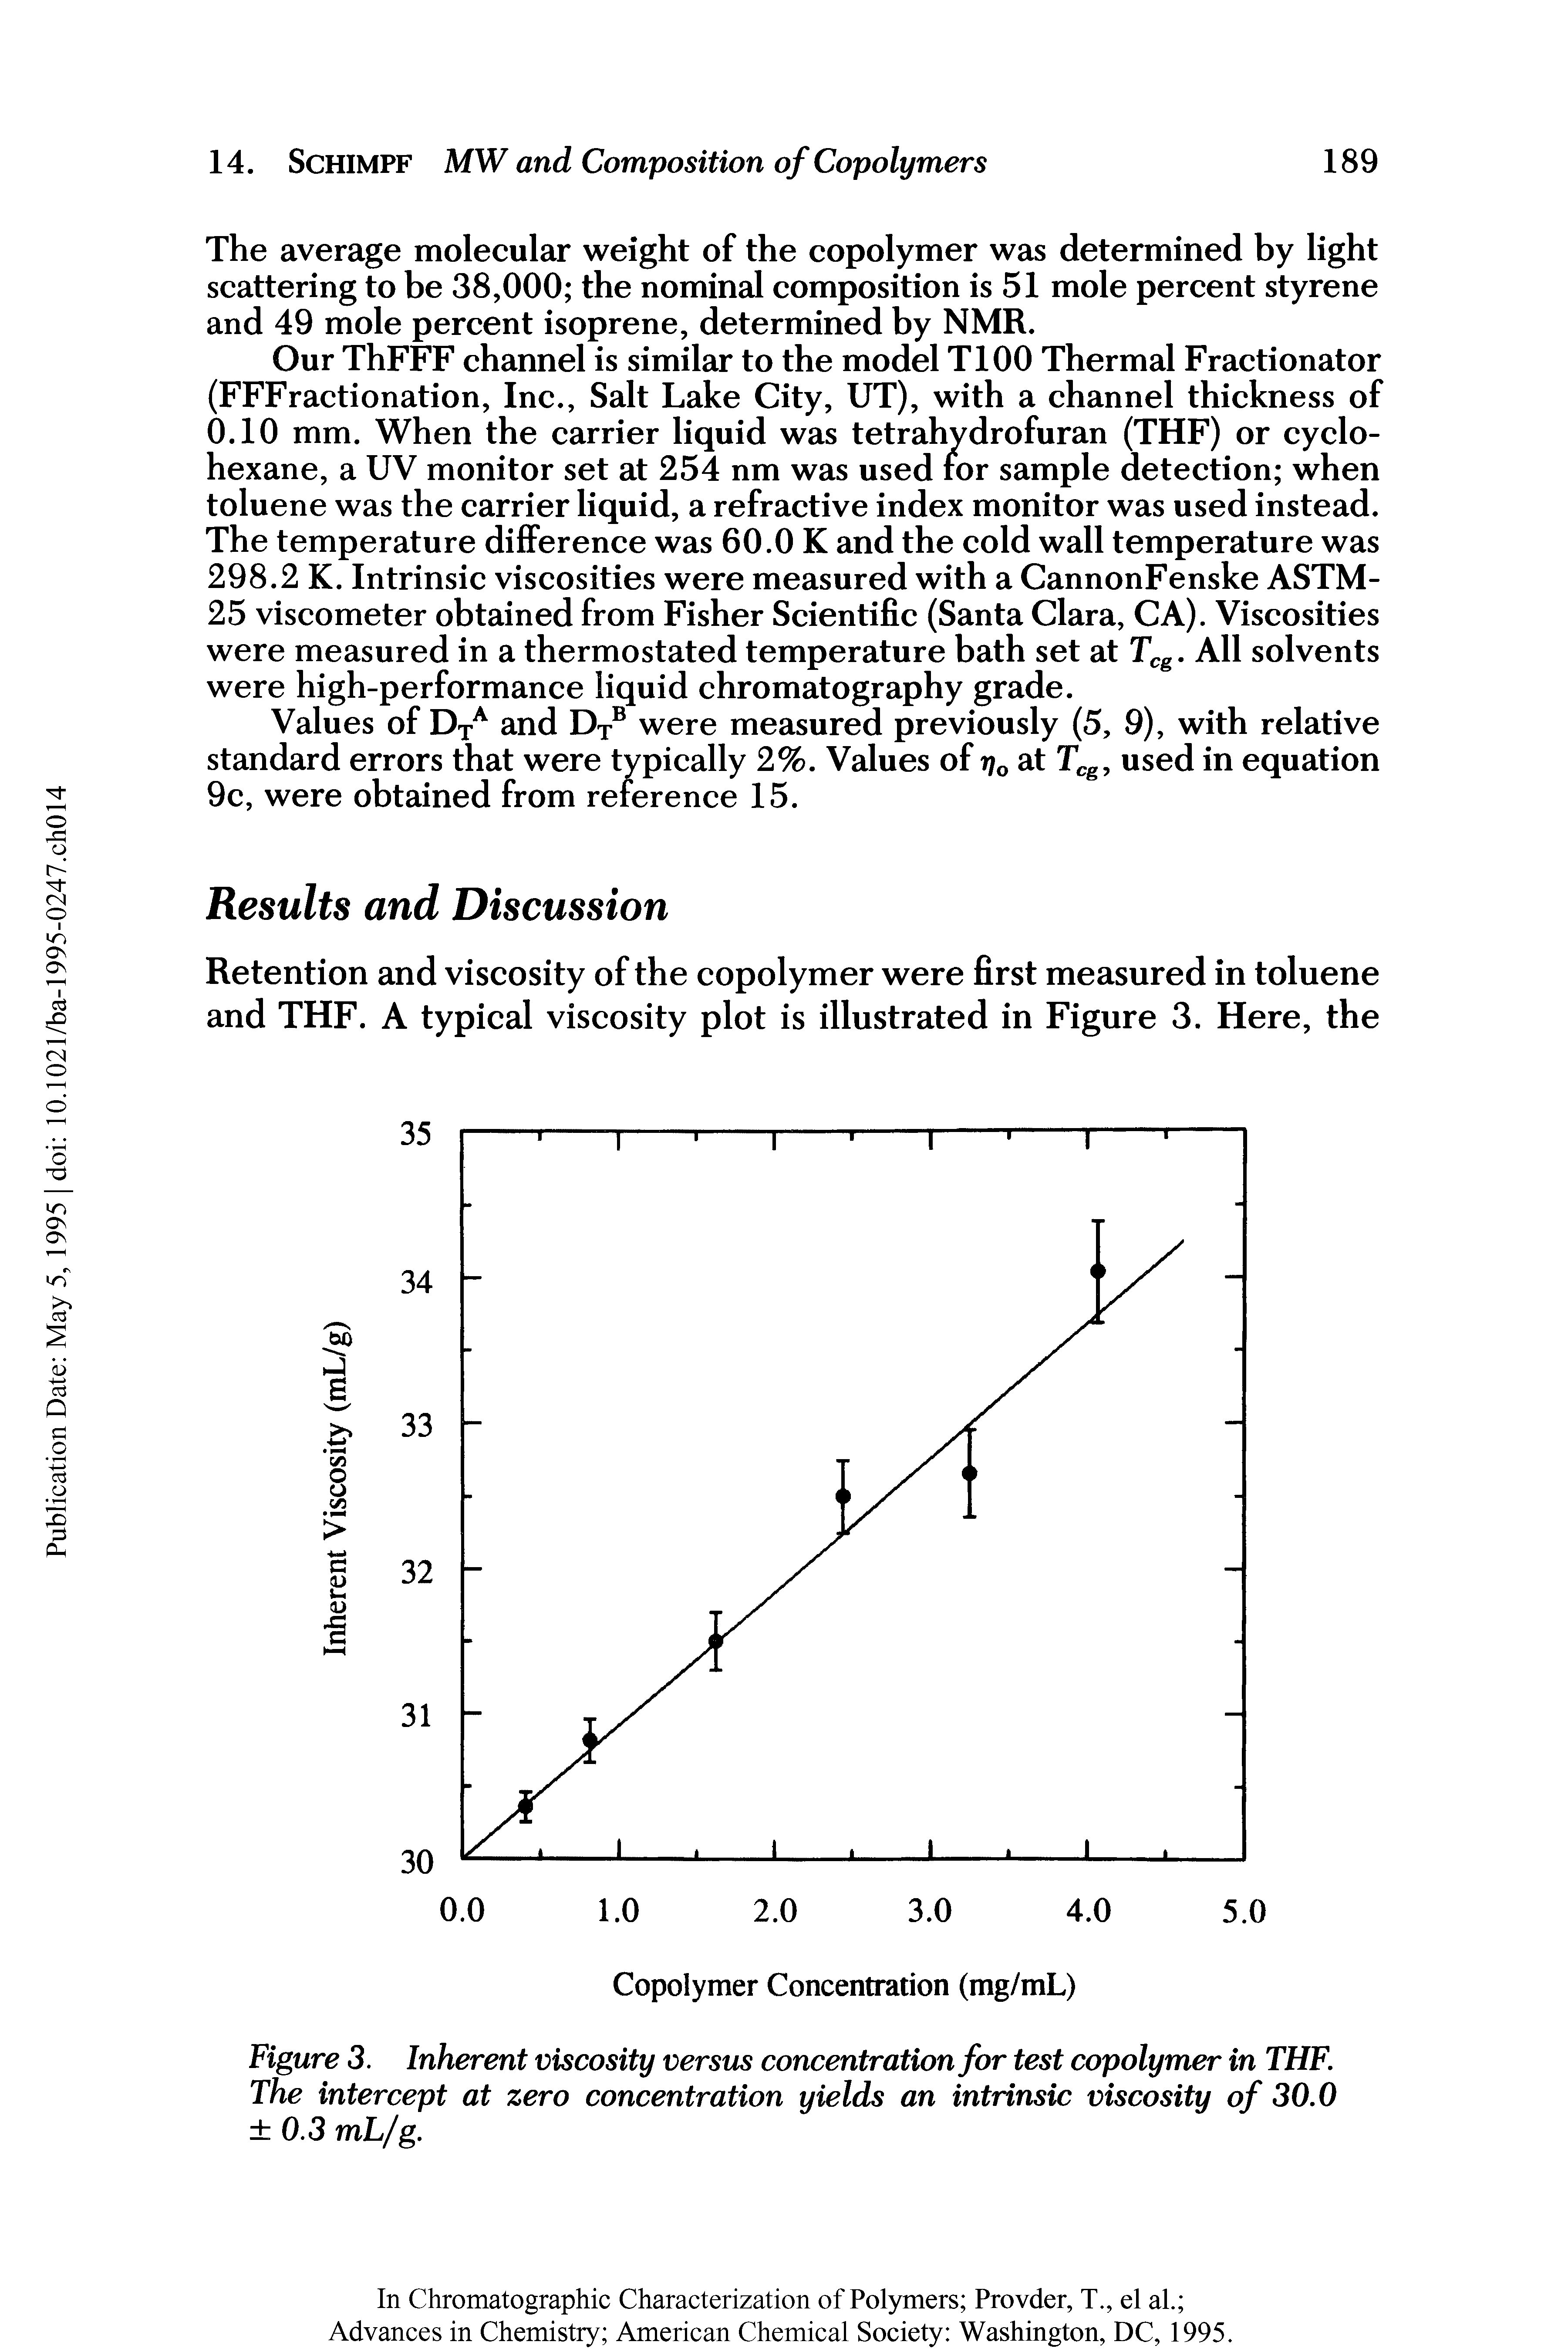 Figure 3. Inherent viscosity versus concentration for test copolymer in THF. The intercept at zero concentration yields an intrinsic viscosity of 30.0 0.3 mL/g.